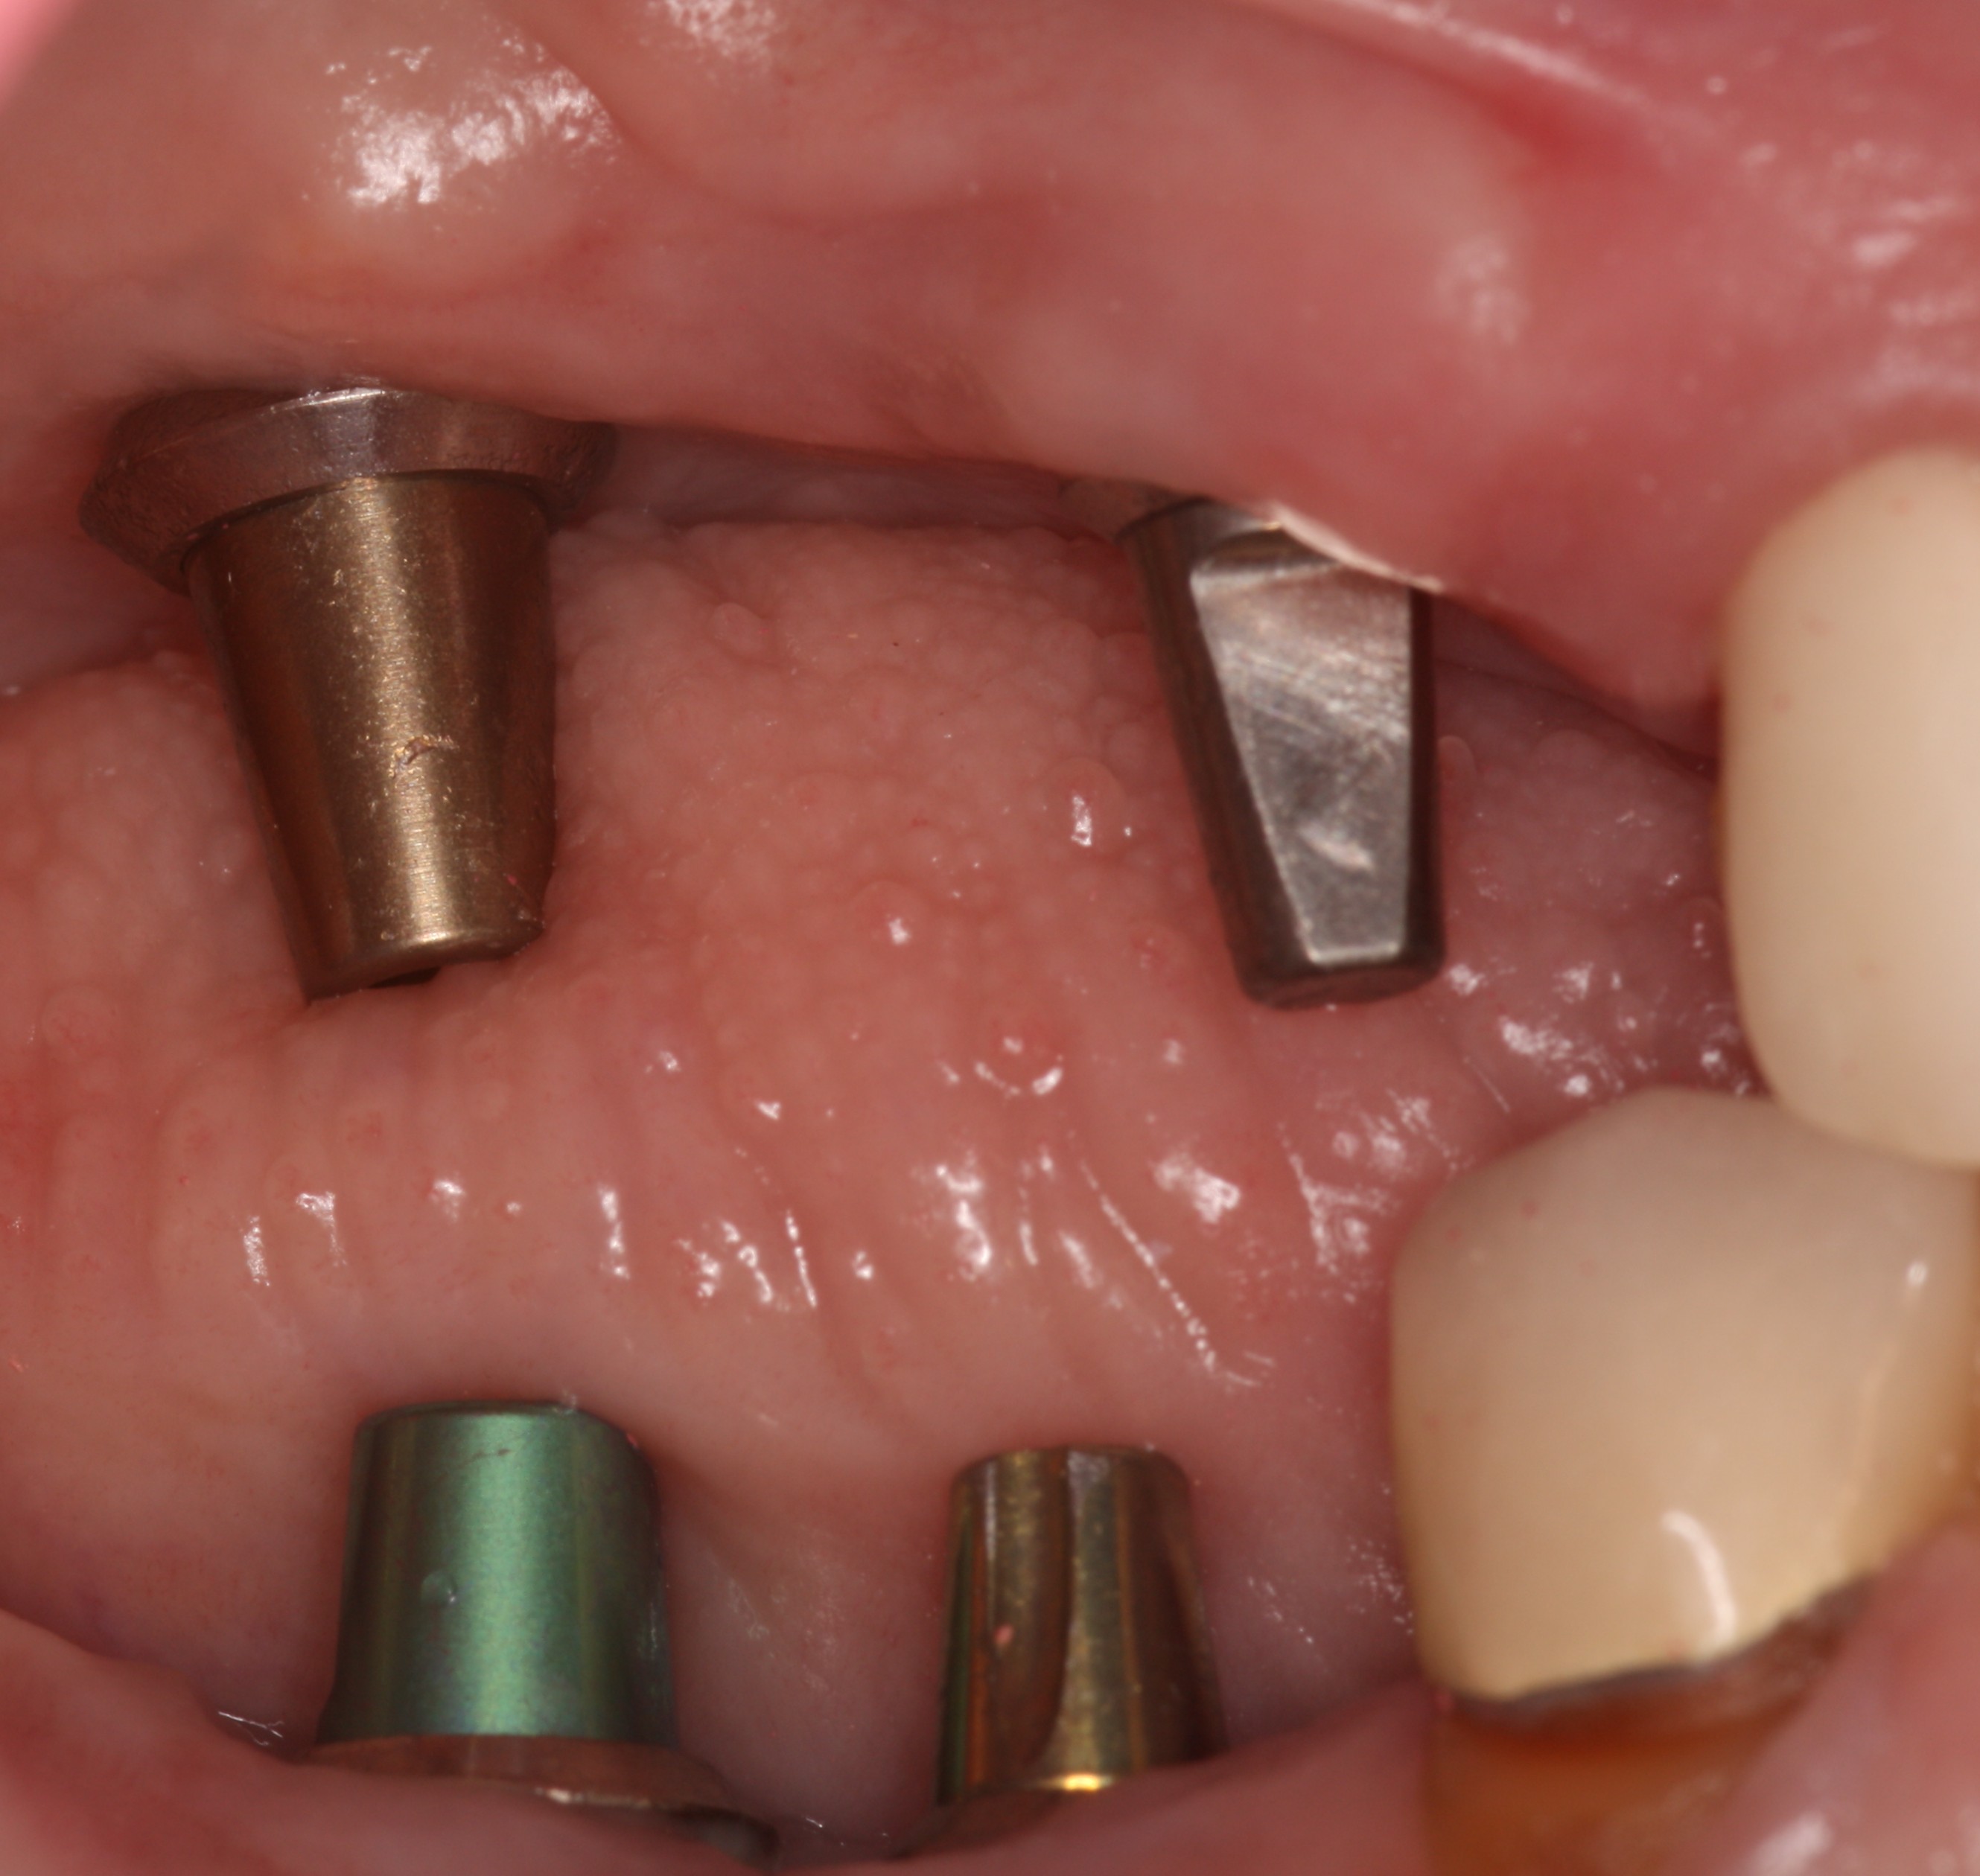 Upper & Lower Dental Implants with solid abutments.